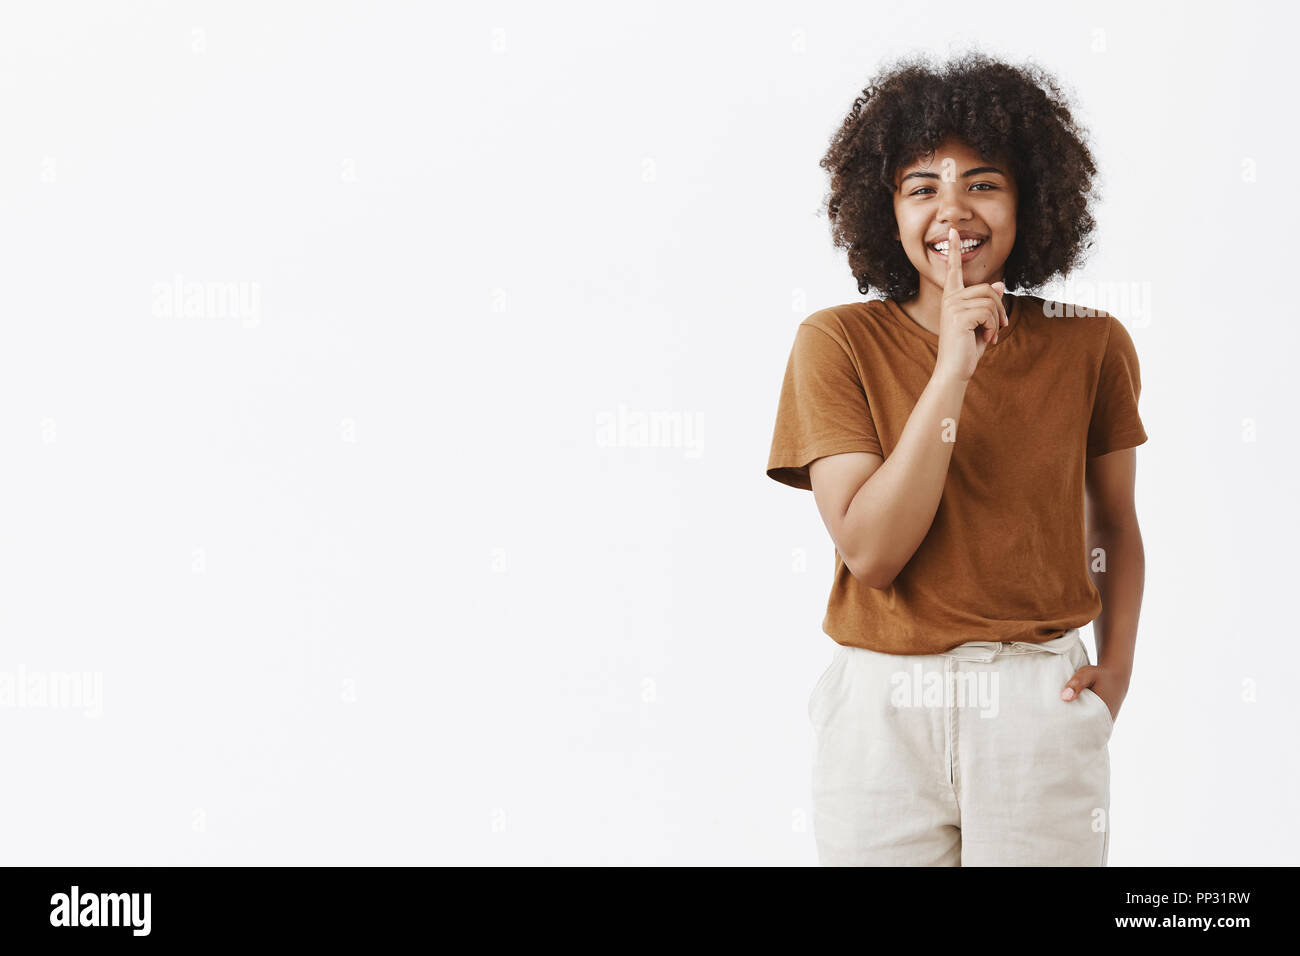 Happy carefree african-american cute teenage girl with afro hairstyle in stylish brown t-shirt and white pants holding hand in pocket casually smiling, showing shush sign with index finger over mouth Stock Photo